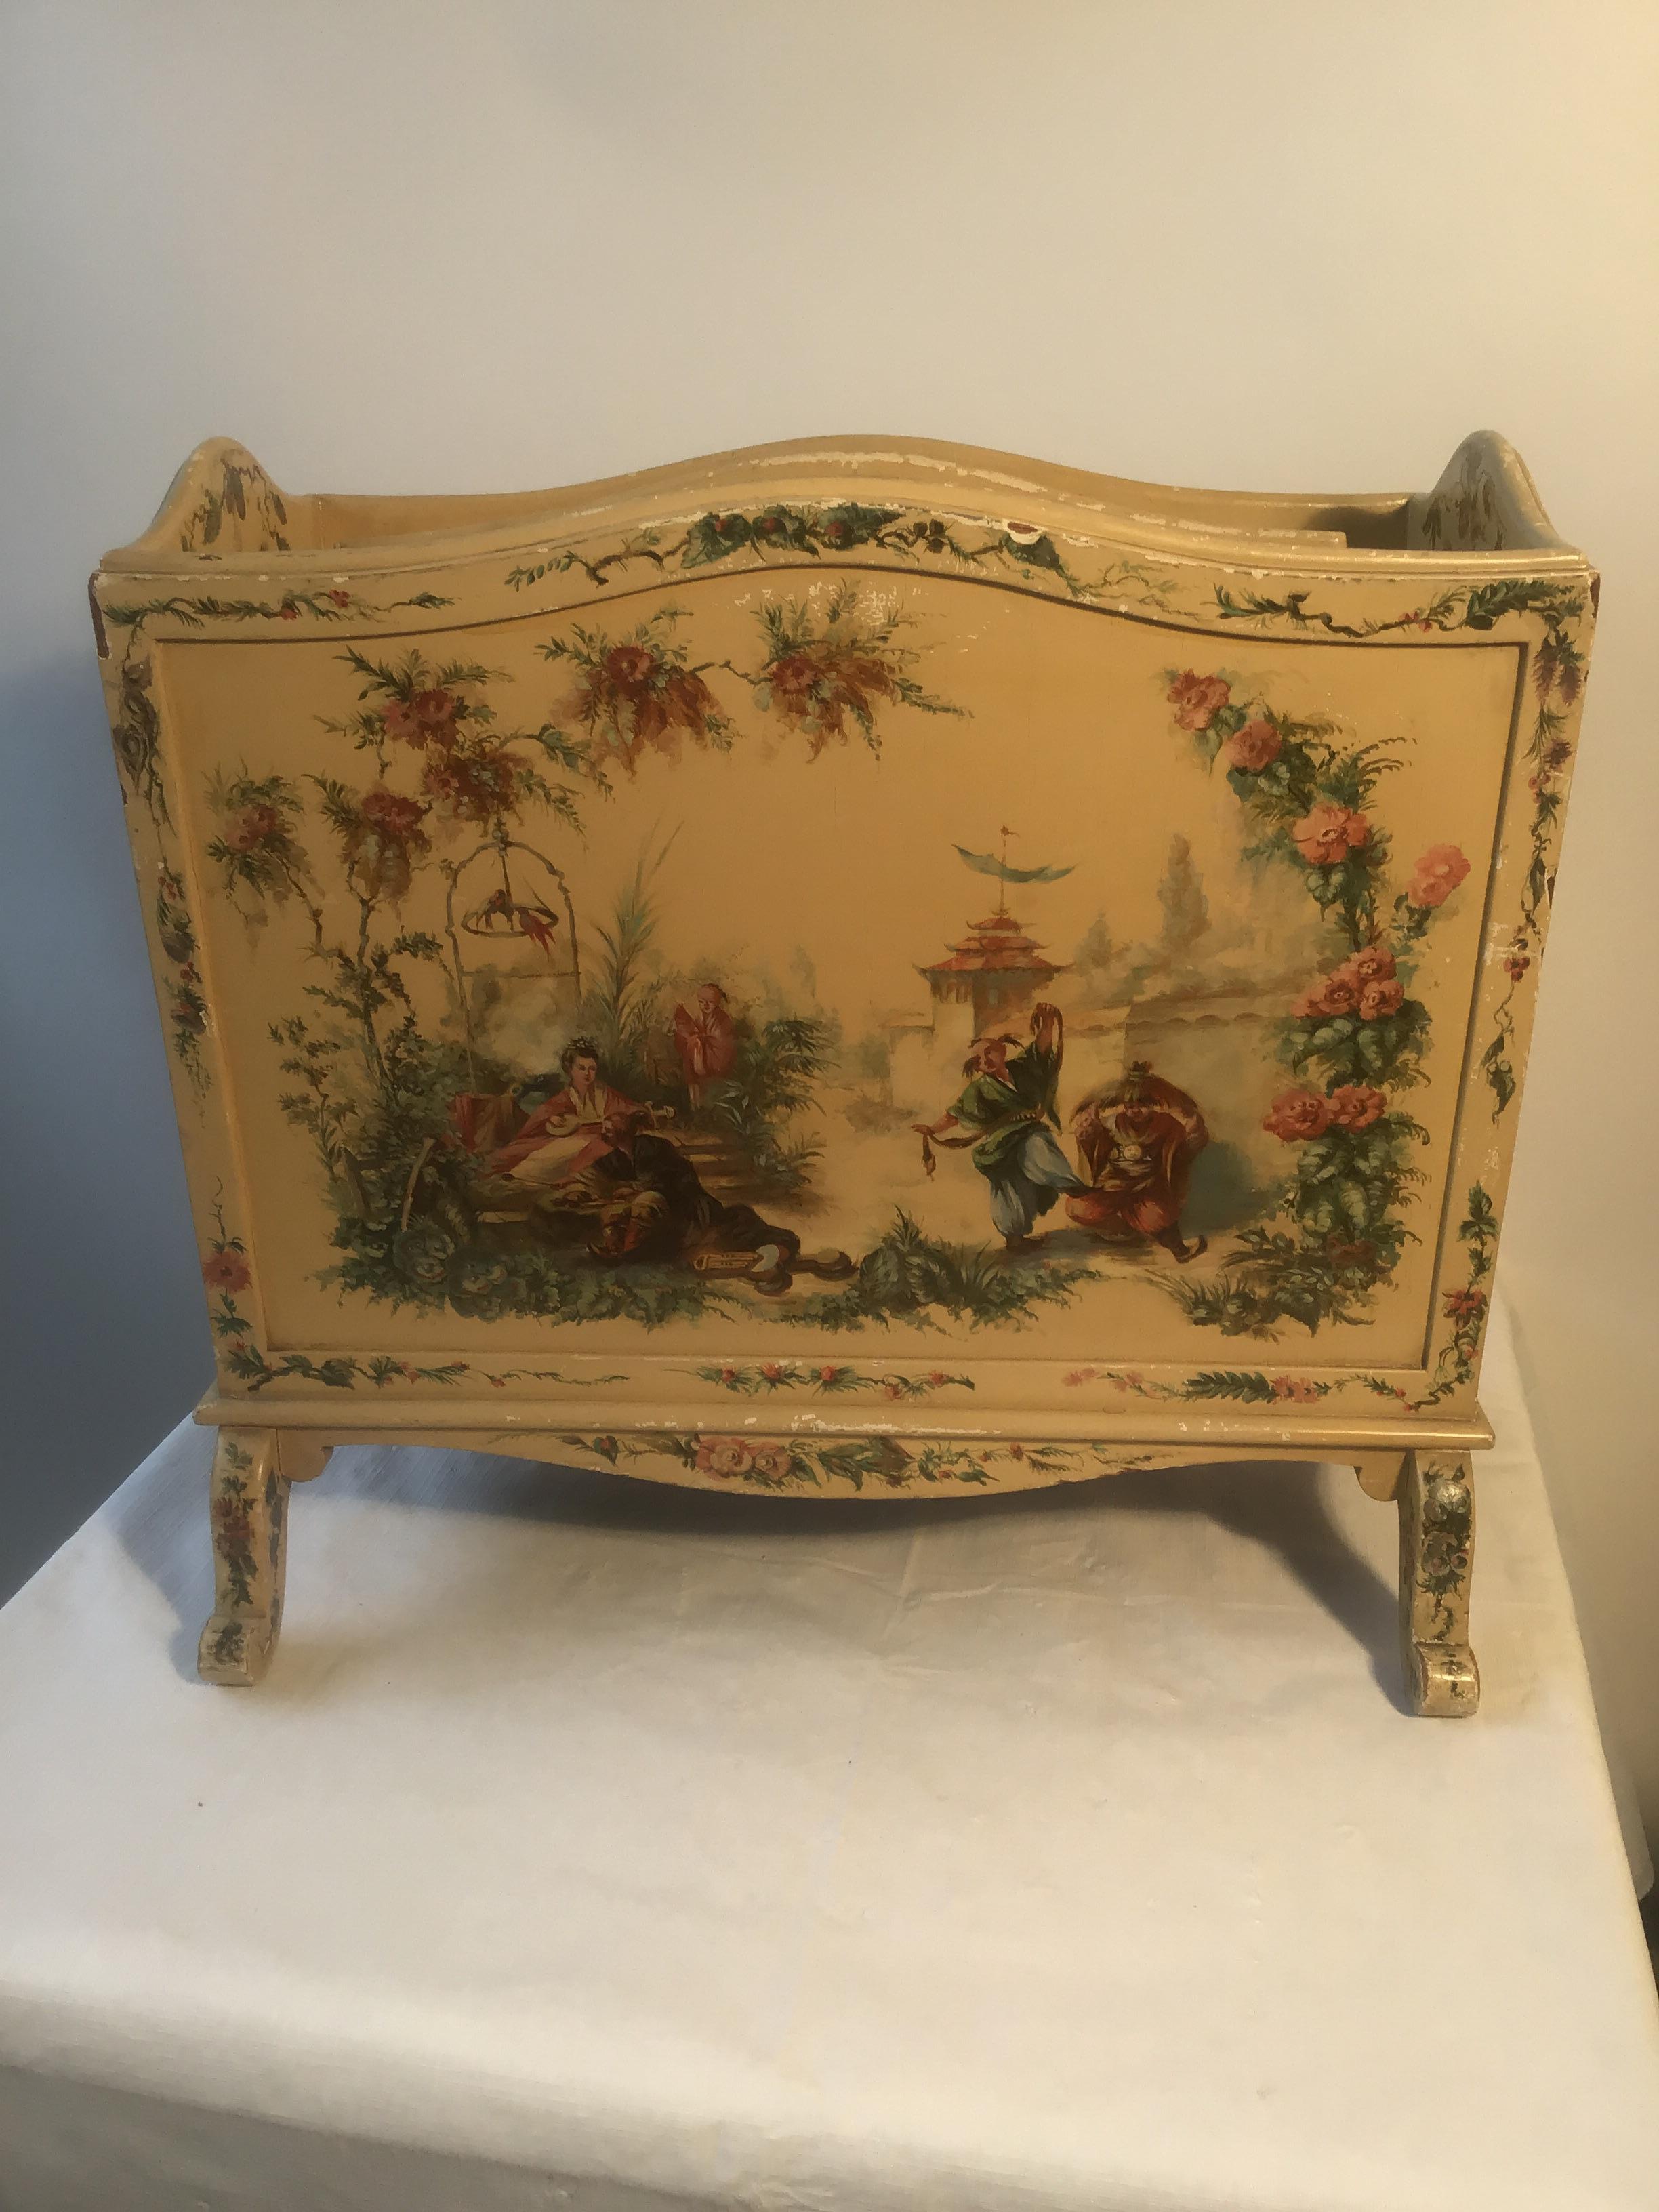 1940s chinoiserie hand painted wood magazine holder. Exquisitely done.